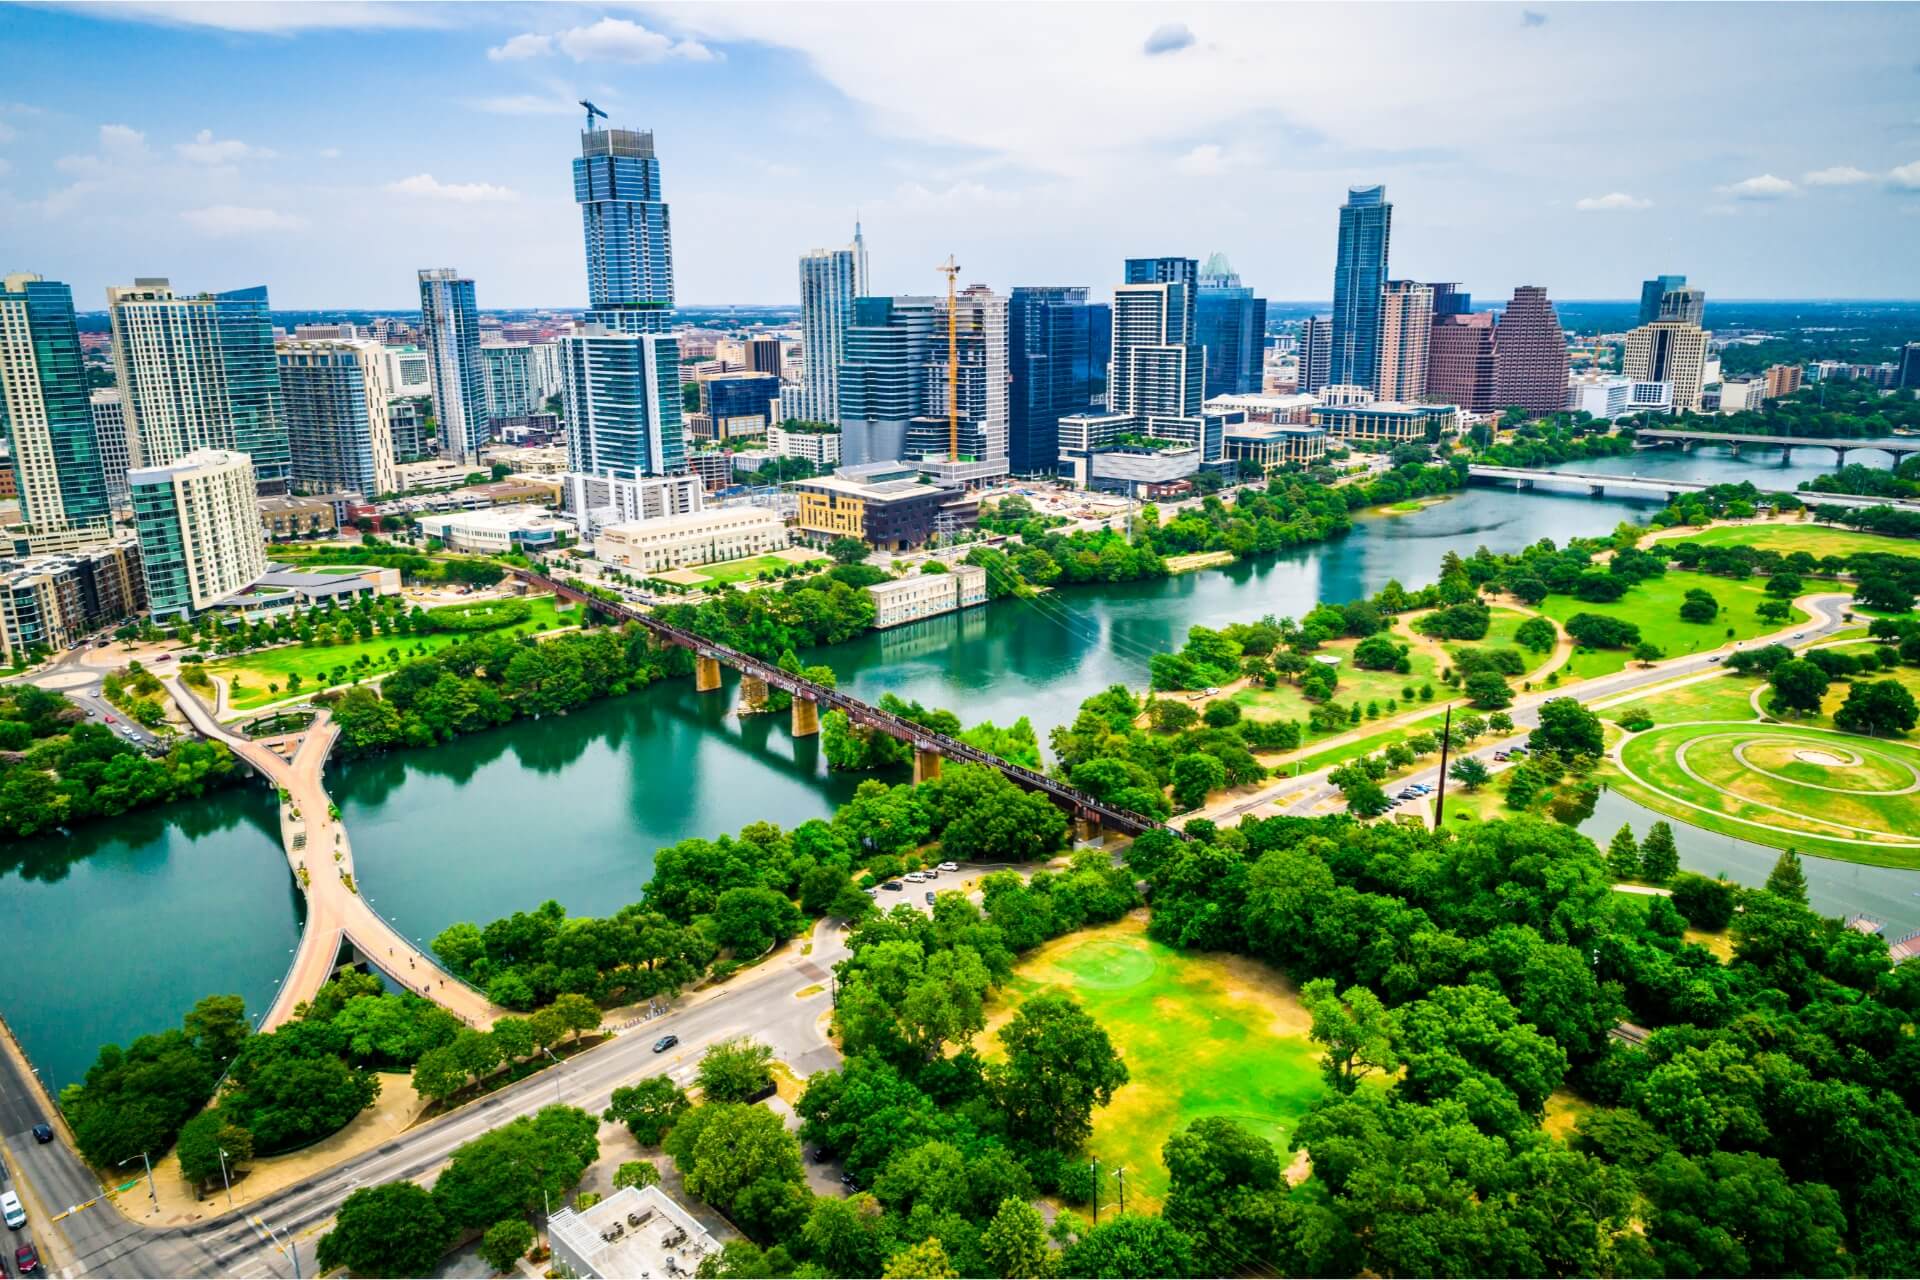 Houston, Texas - green parks and areas